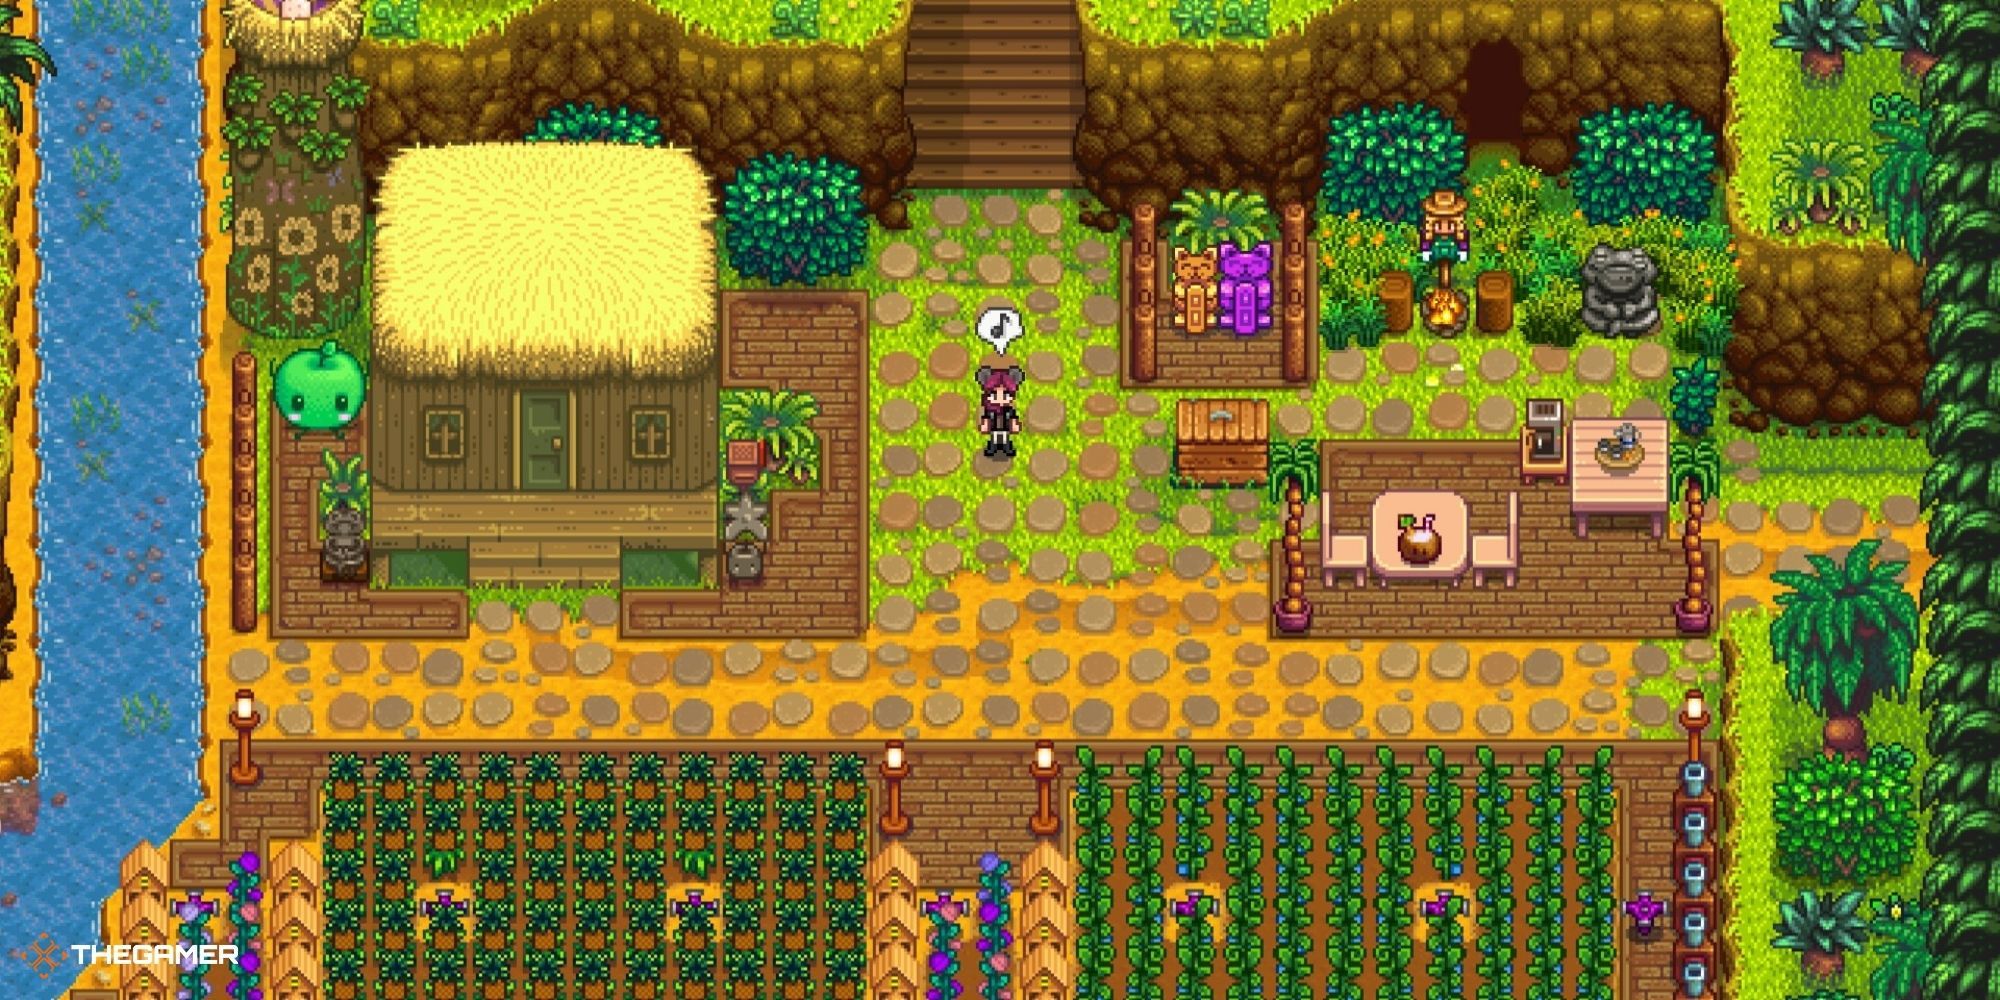 Stardew Valley: Tips To Make The Most Of Mining